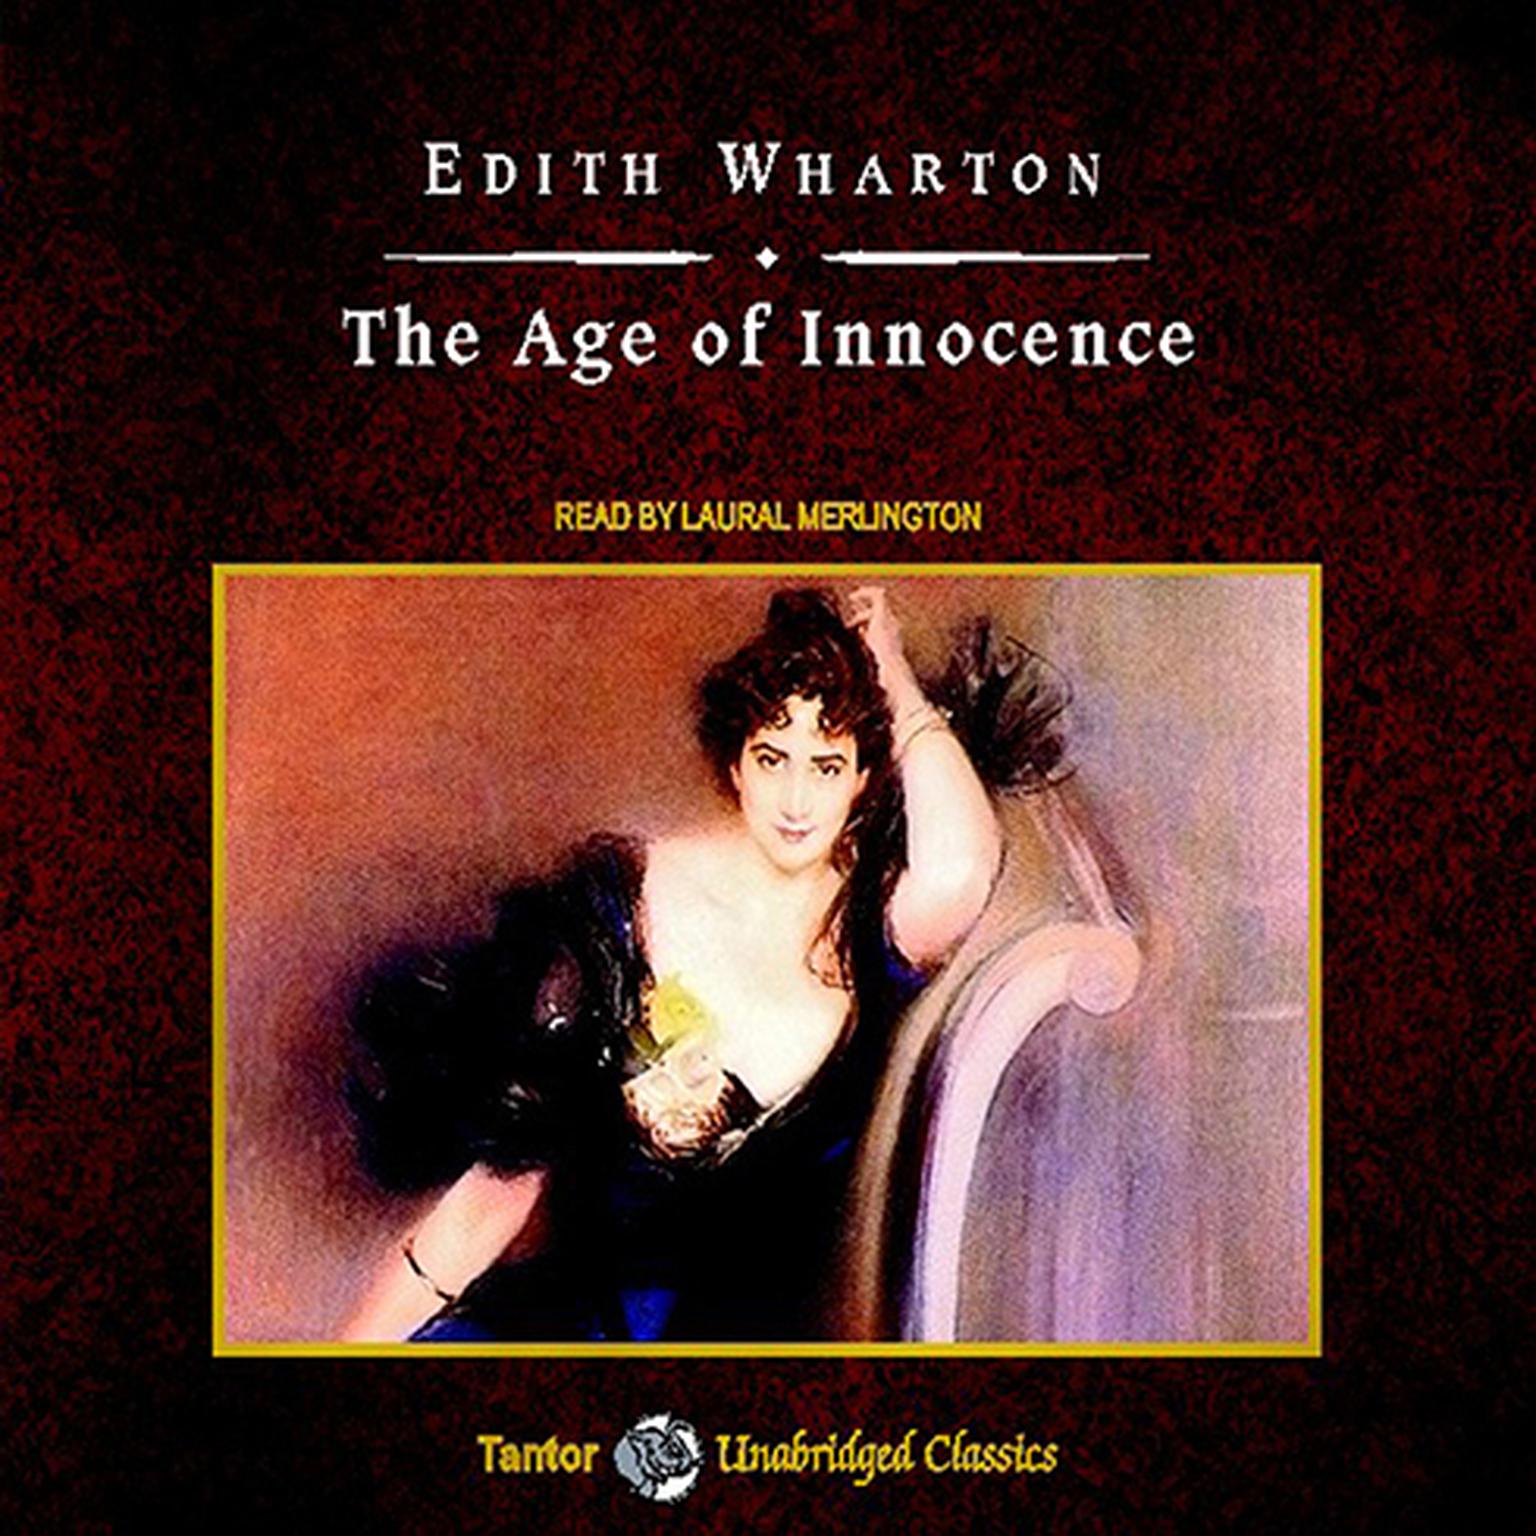 The Age of Innocence, with eBook Audiobook, by Edith Wharton